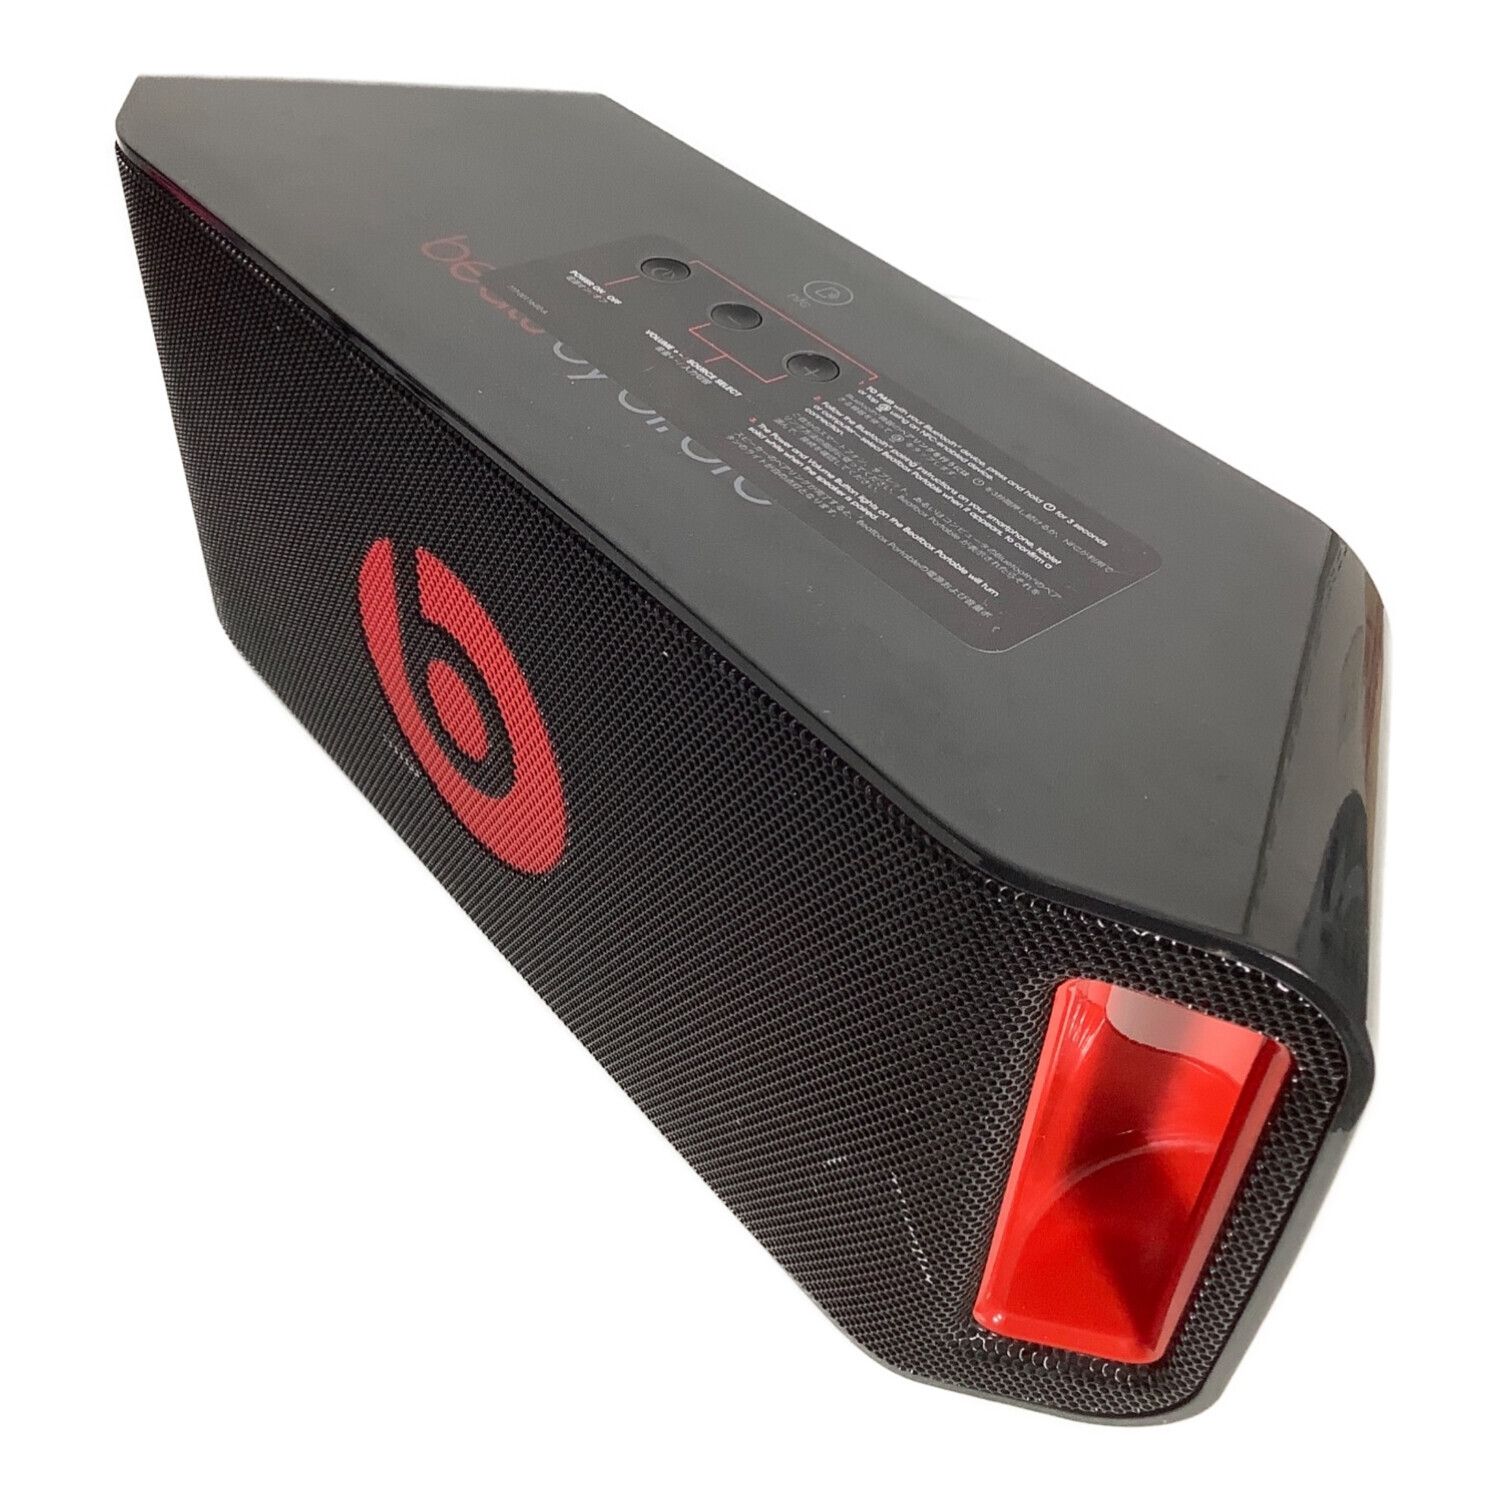 Beatbox Portable Beats by Dr.Dre スピーカー - スピーカー